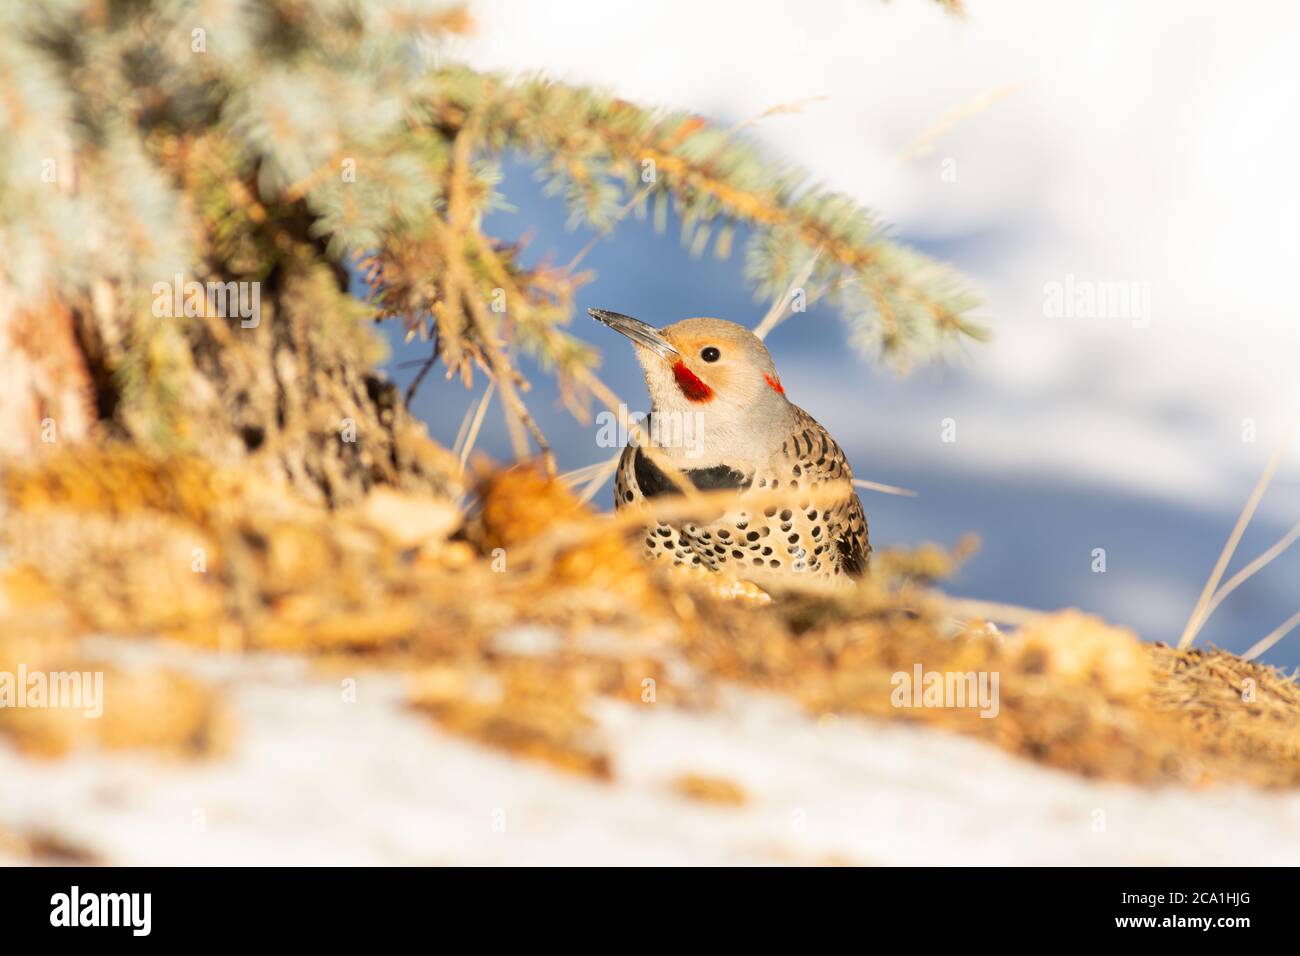 A northern flicker, Colaptes auratus, foraging on the ground among snow and fallen spruce cones in central Alberta, Canada Stock Photo